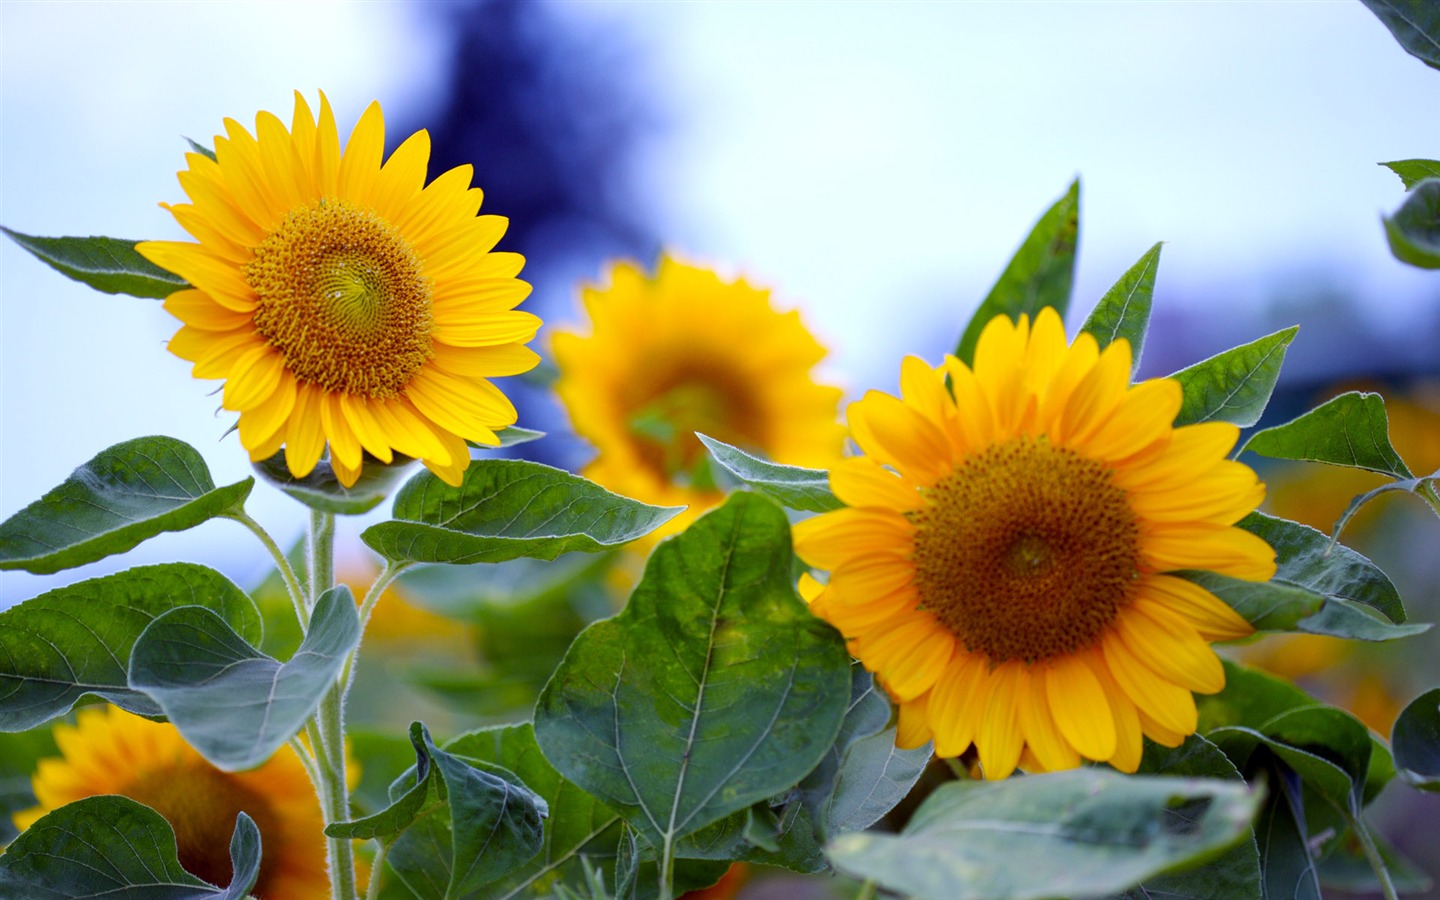 Sunny sunflower photo HD Wallpapers #23 - 1440x900